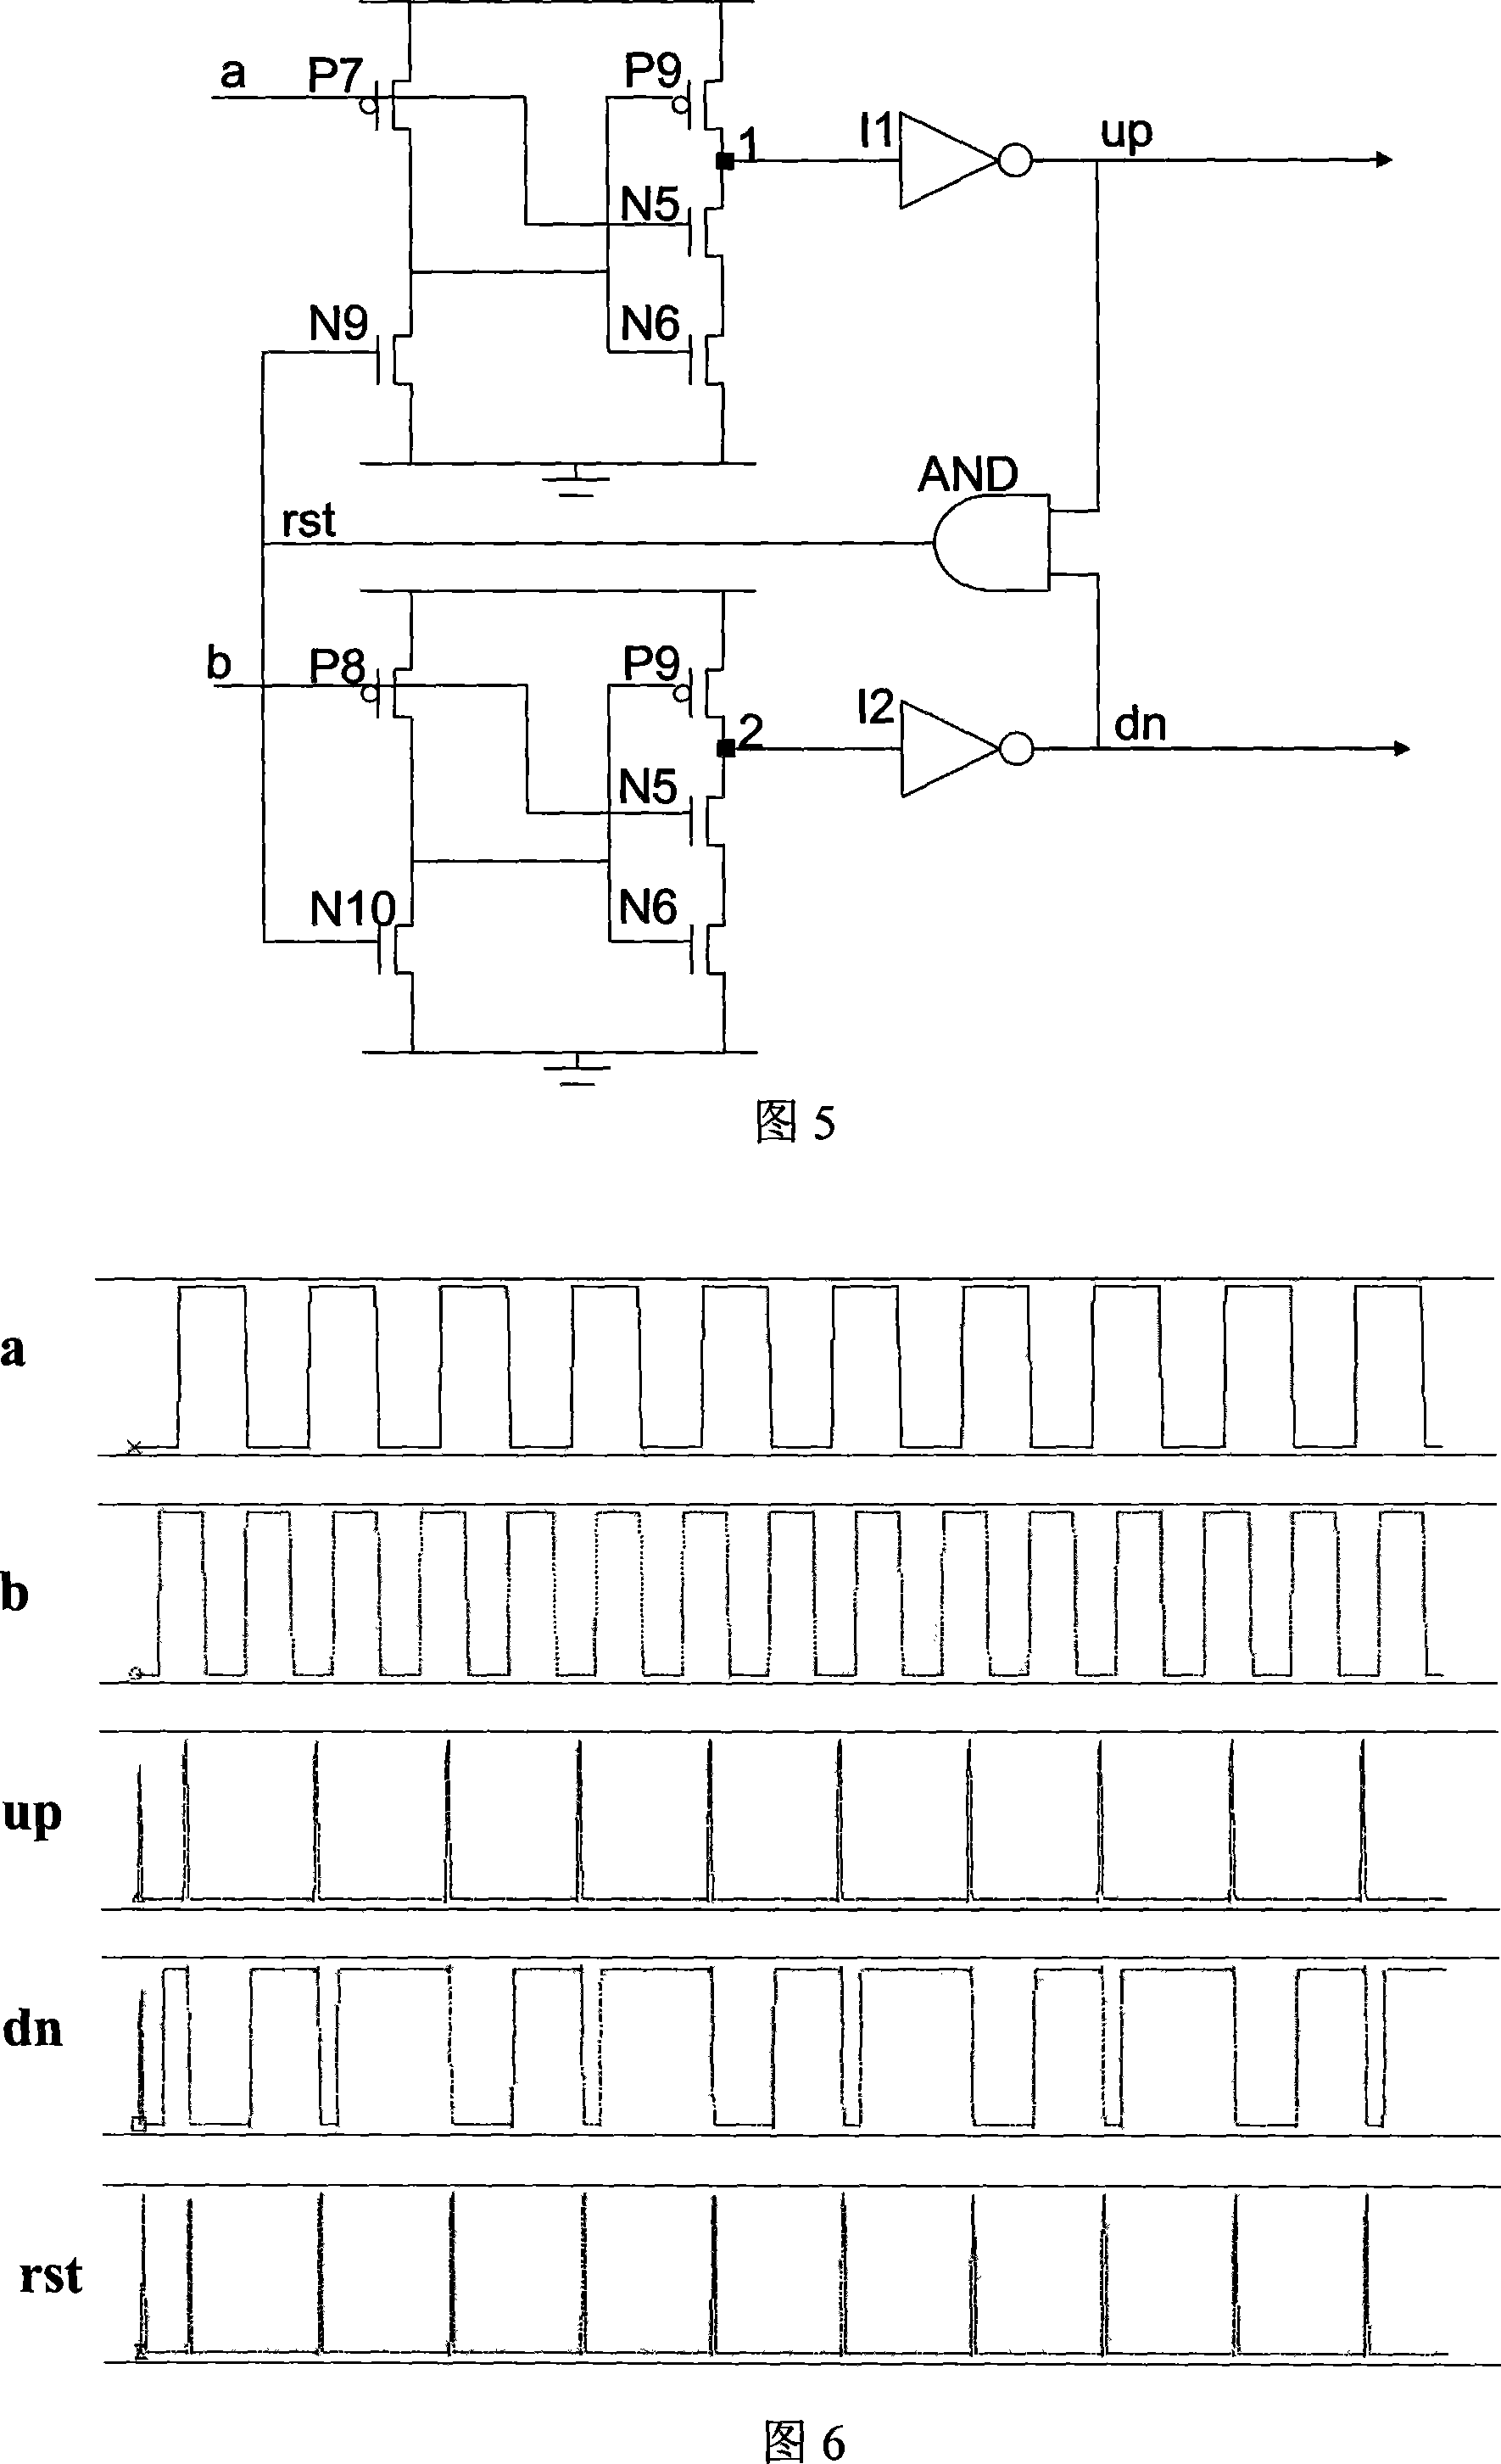 Phase frequency discriminator